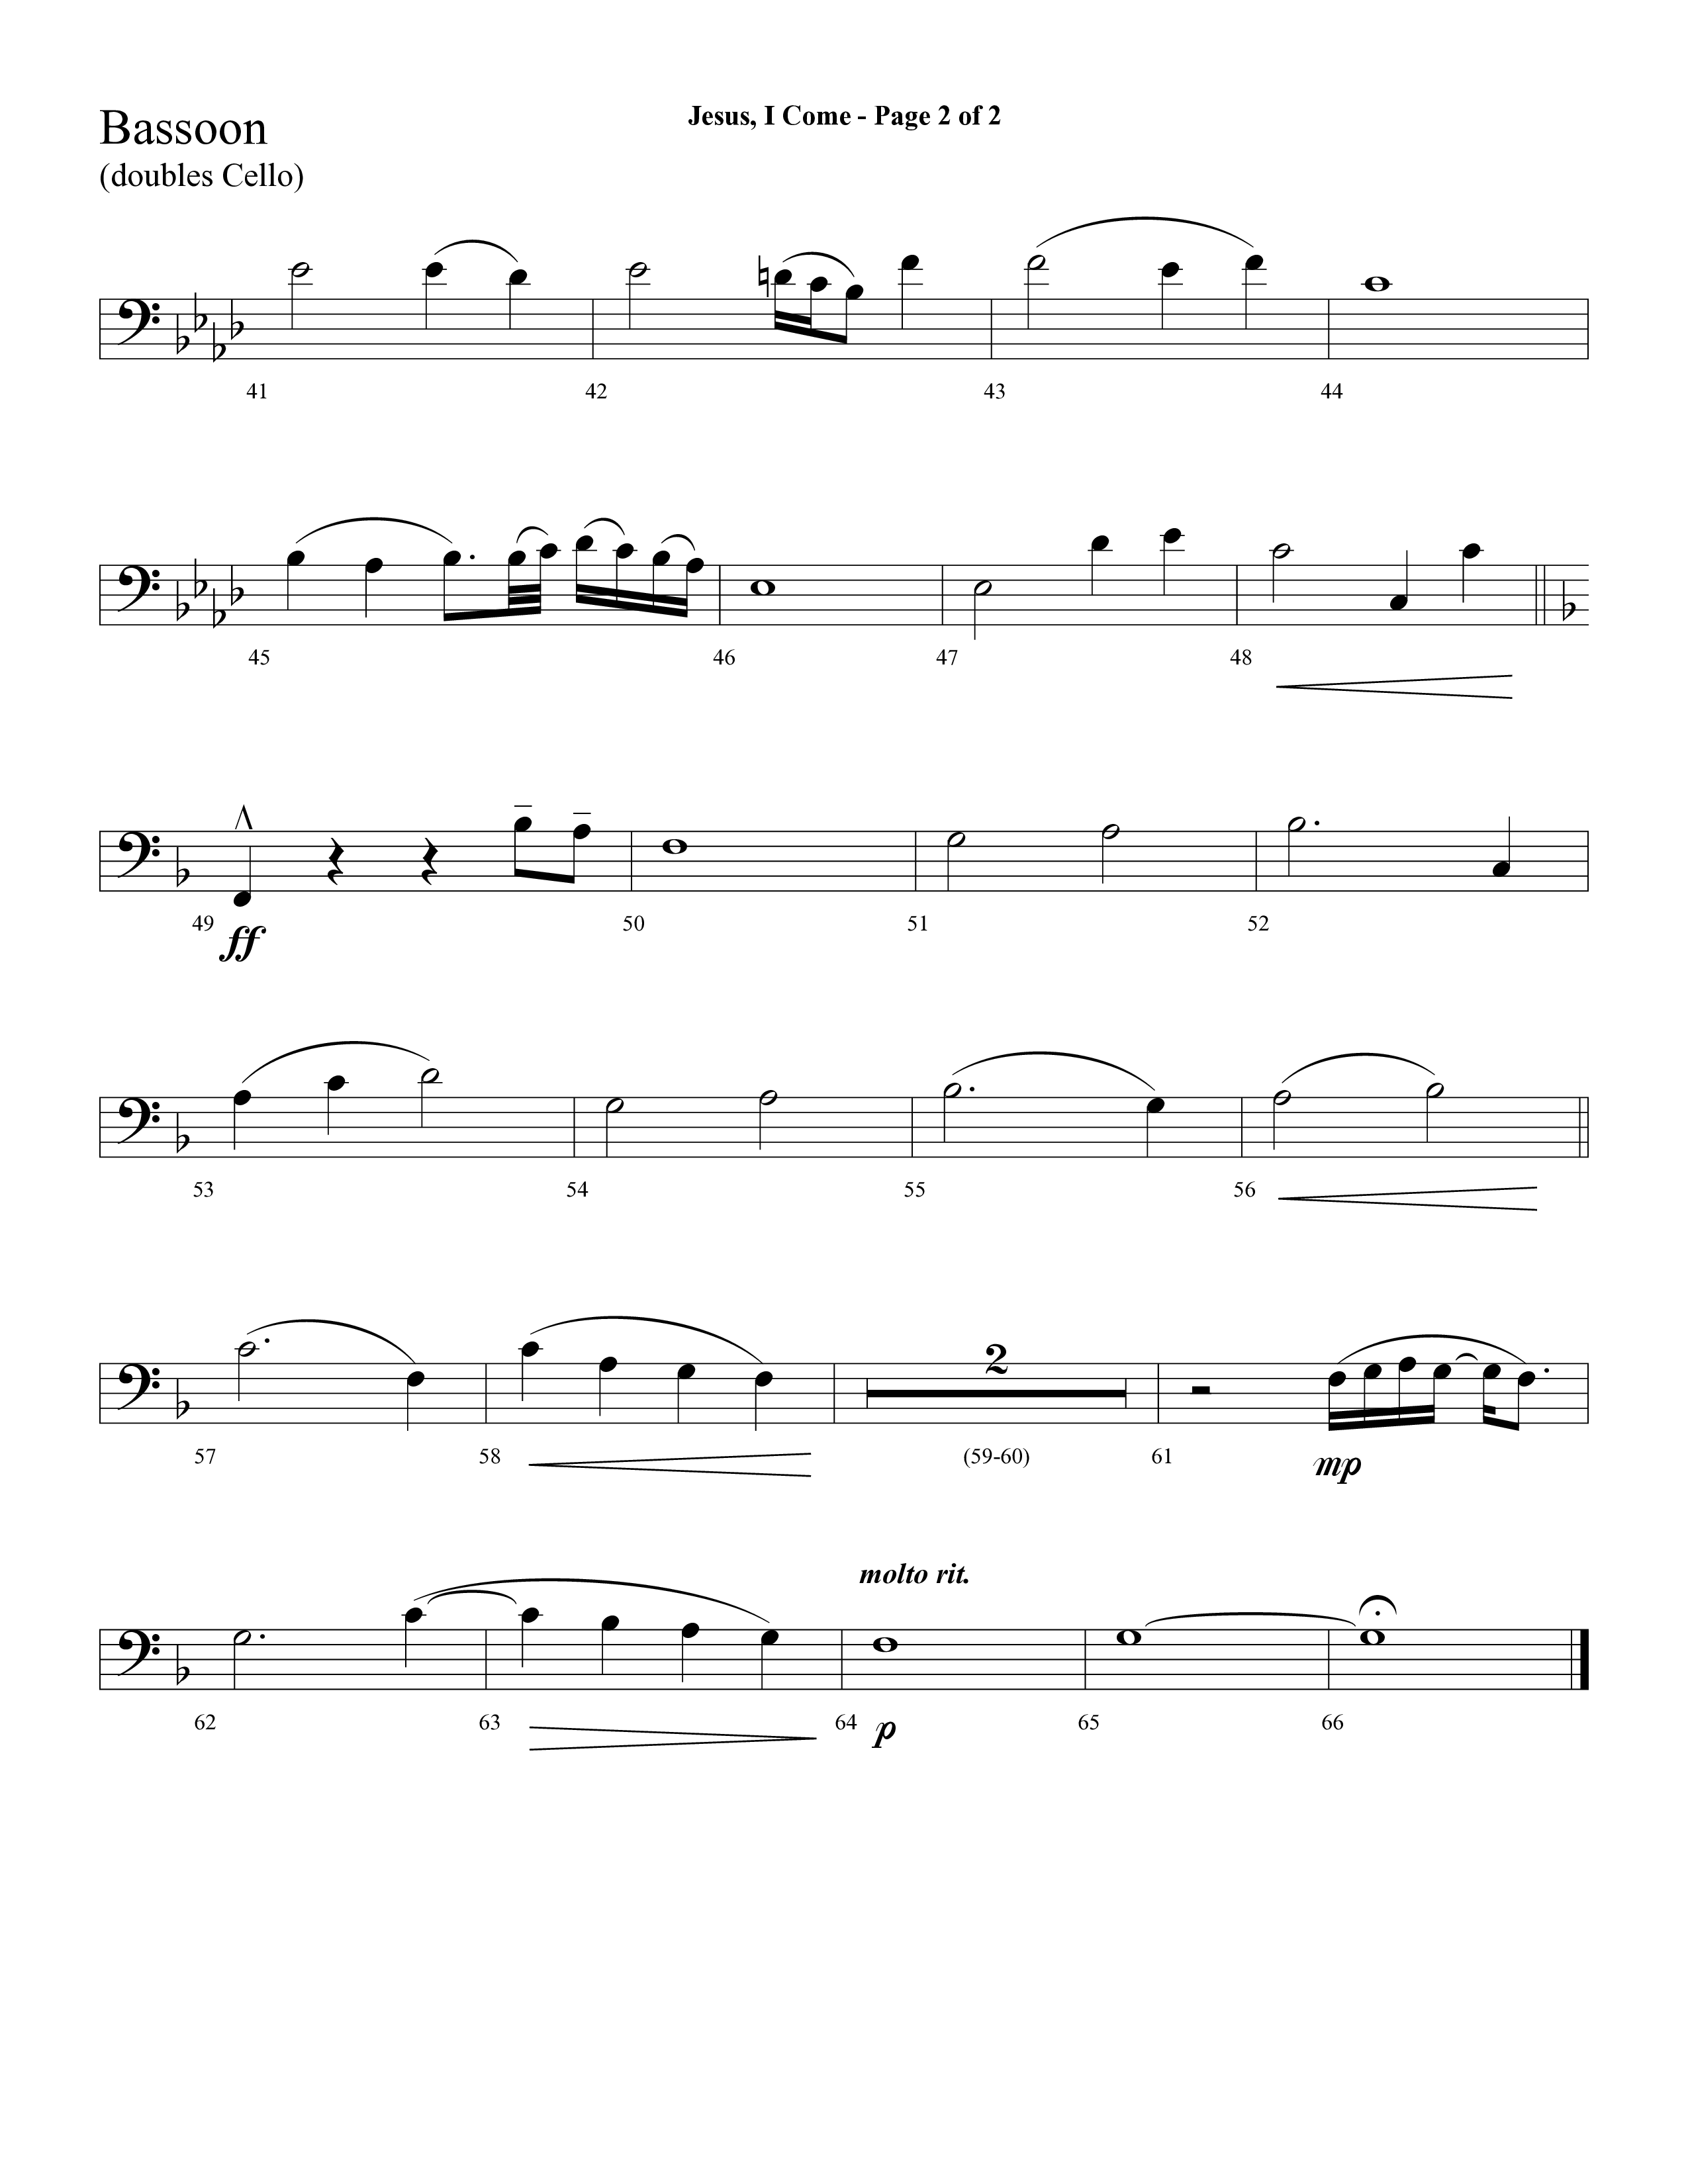 Jesus I Come (with Pass Me Not) (Choral Anthem SATB) Bassoon (Lifeway Choral / Arr. Cliff Duren)